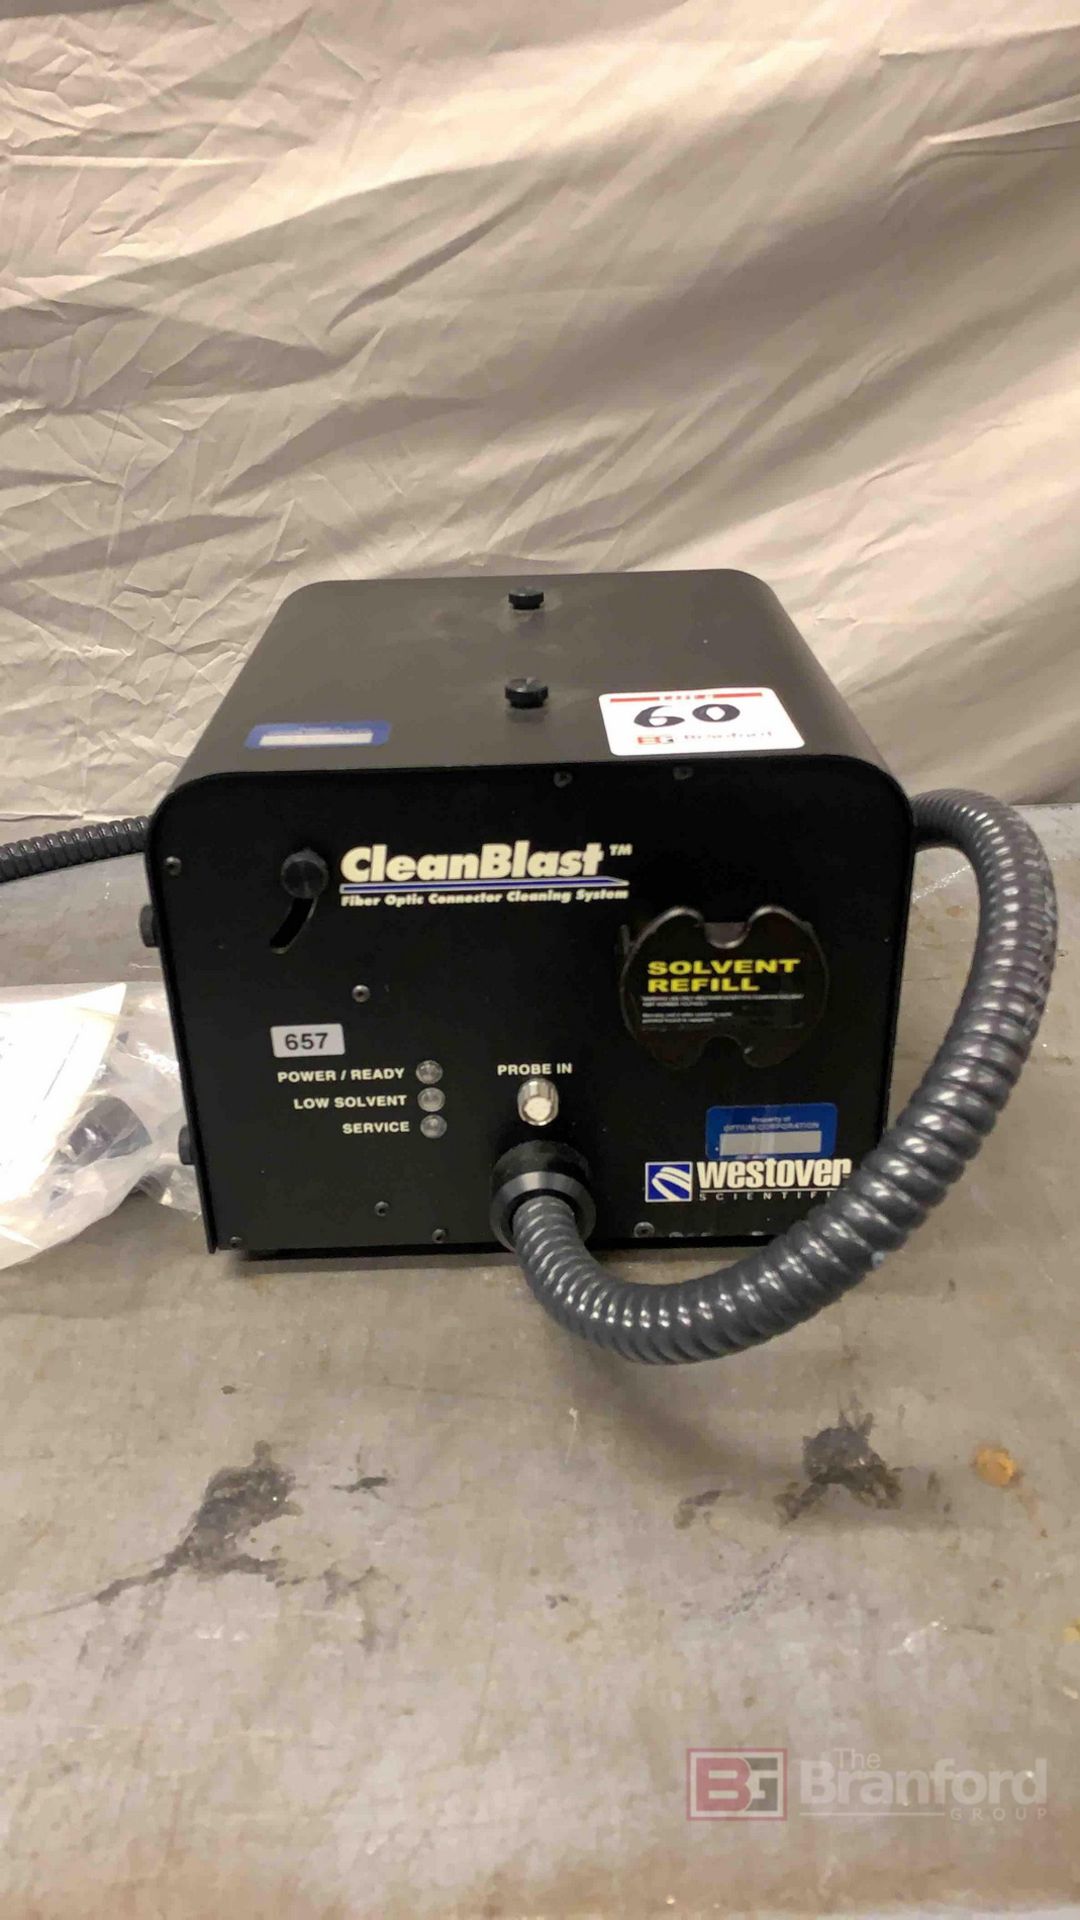 CleanBlast FCL-B100 fiber optic connector cleaning system - Image 2 of 5